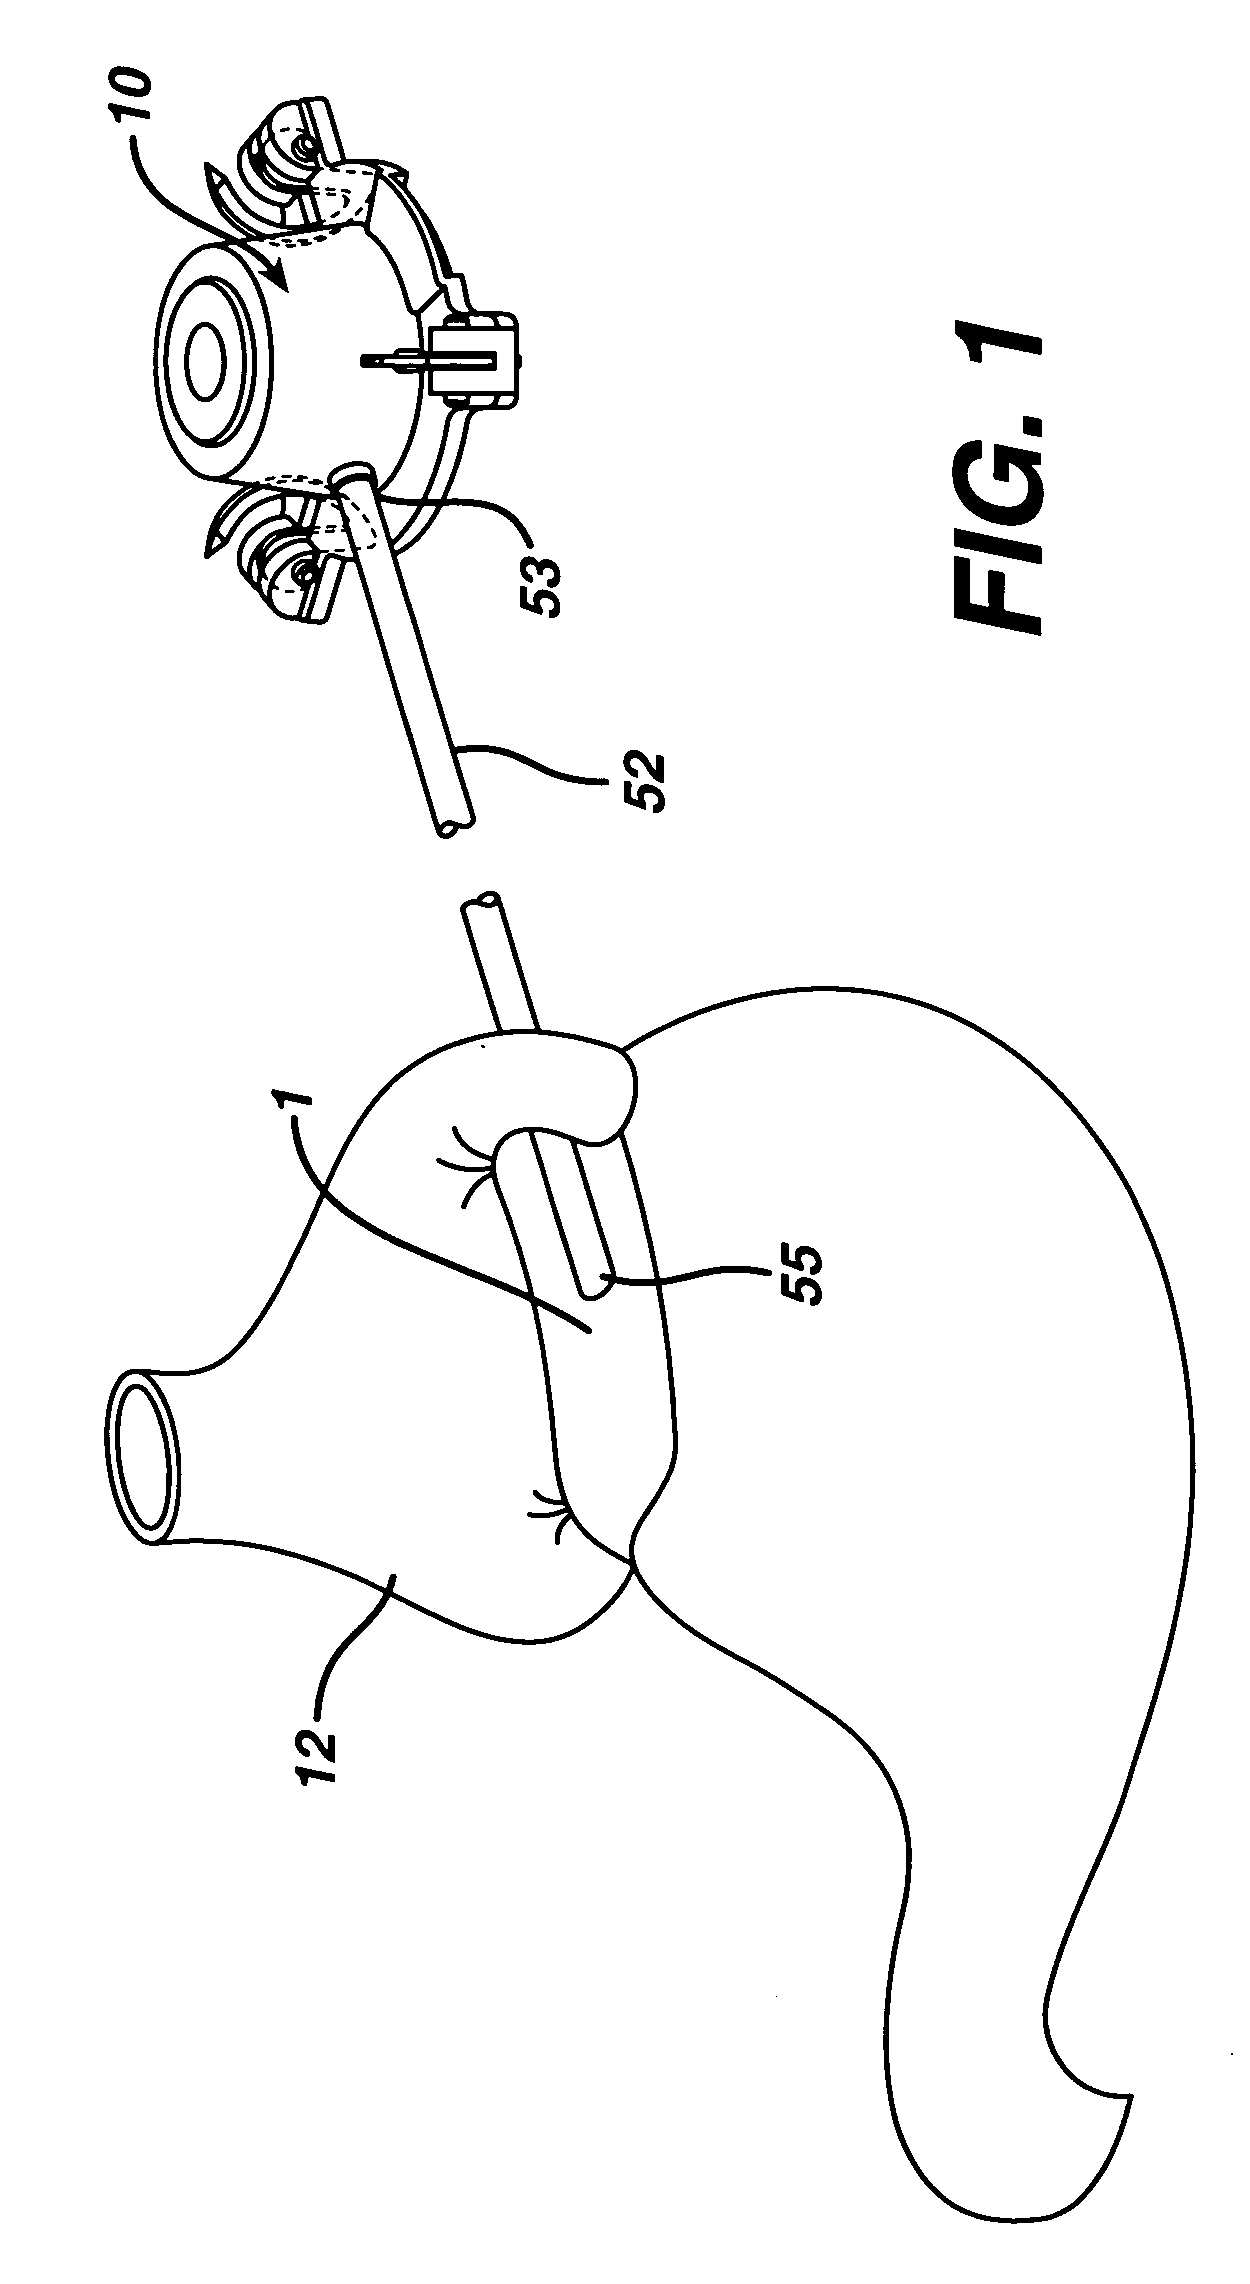 Method of implanting a fluid injection port